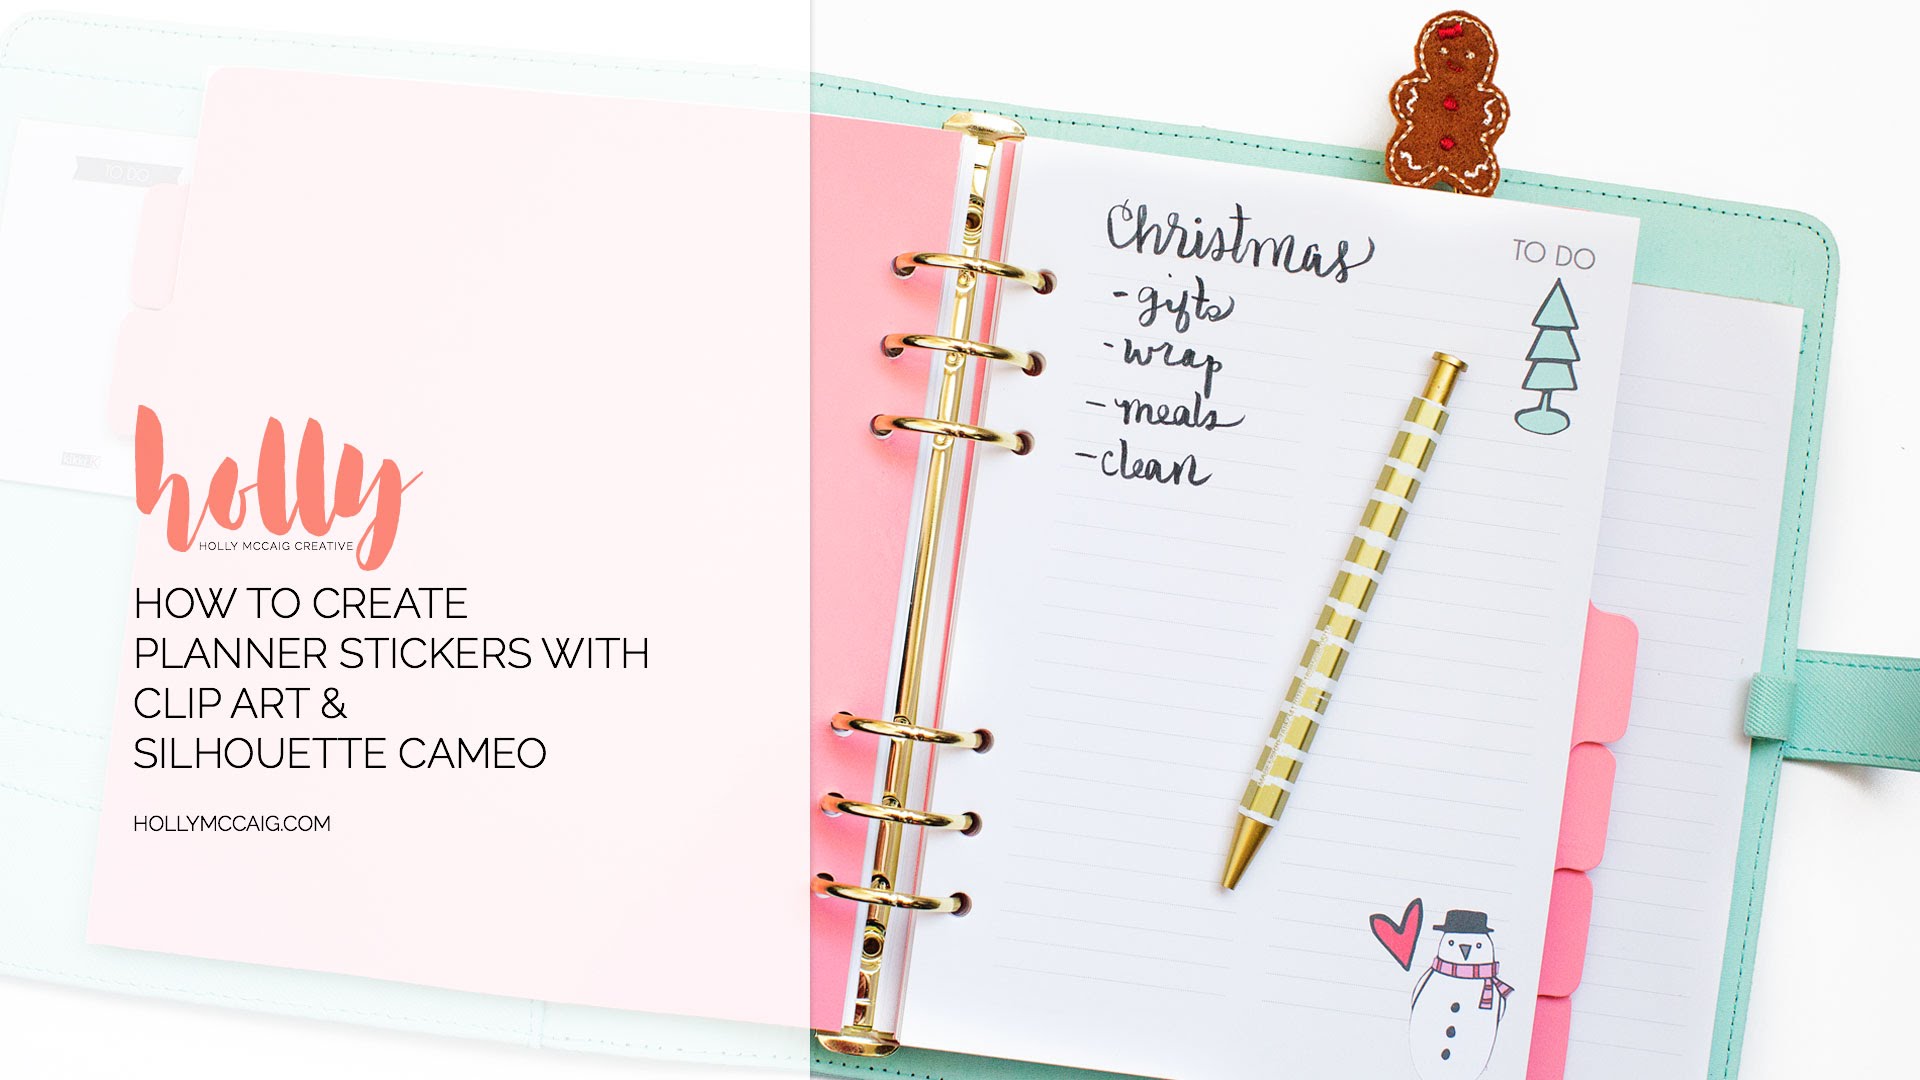 How to Make Your Own Planner Stickers with Clip Art and a